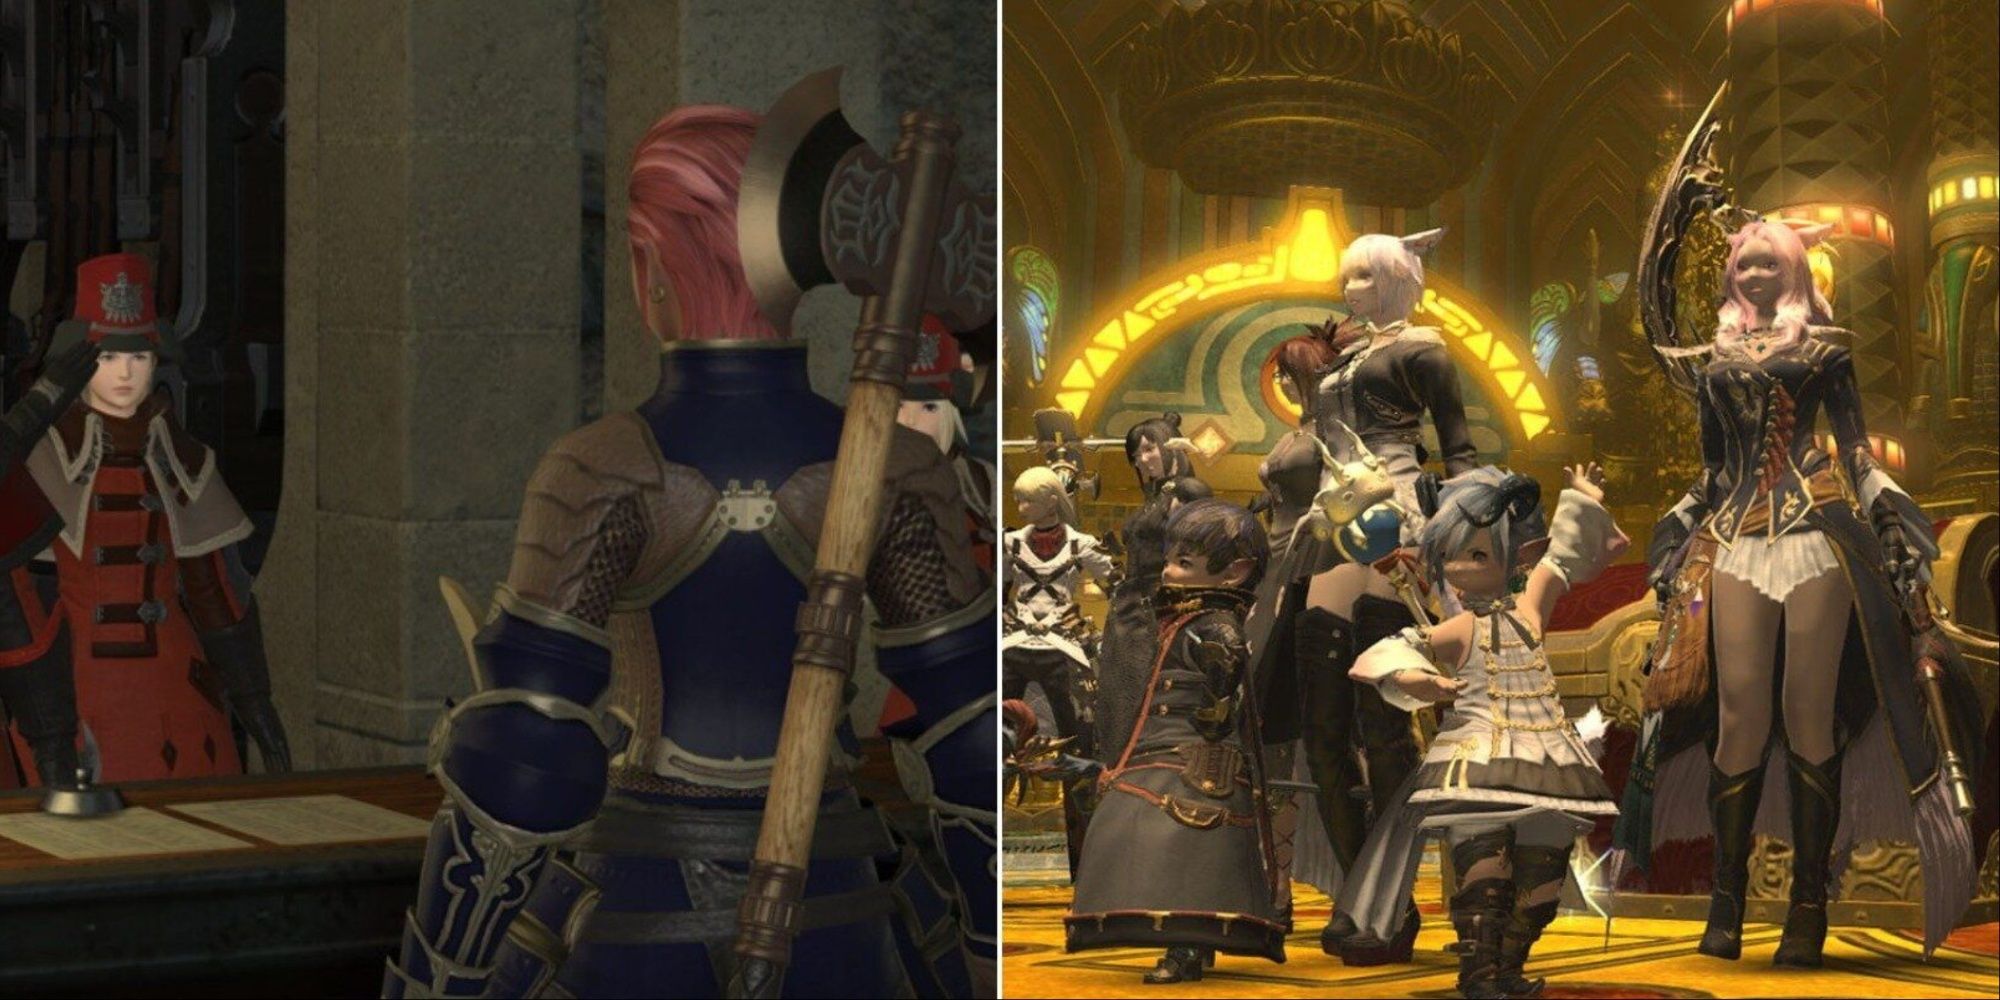 Final Fantasy 14 - Starting a new free company, and a group of characters from the same company